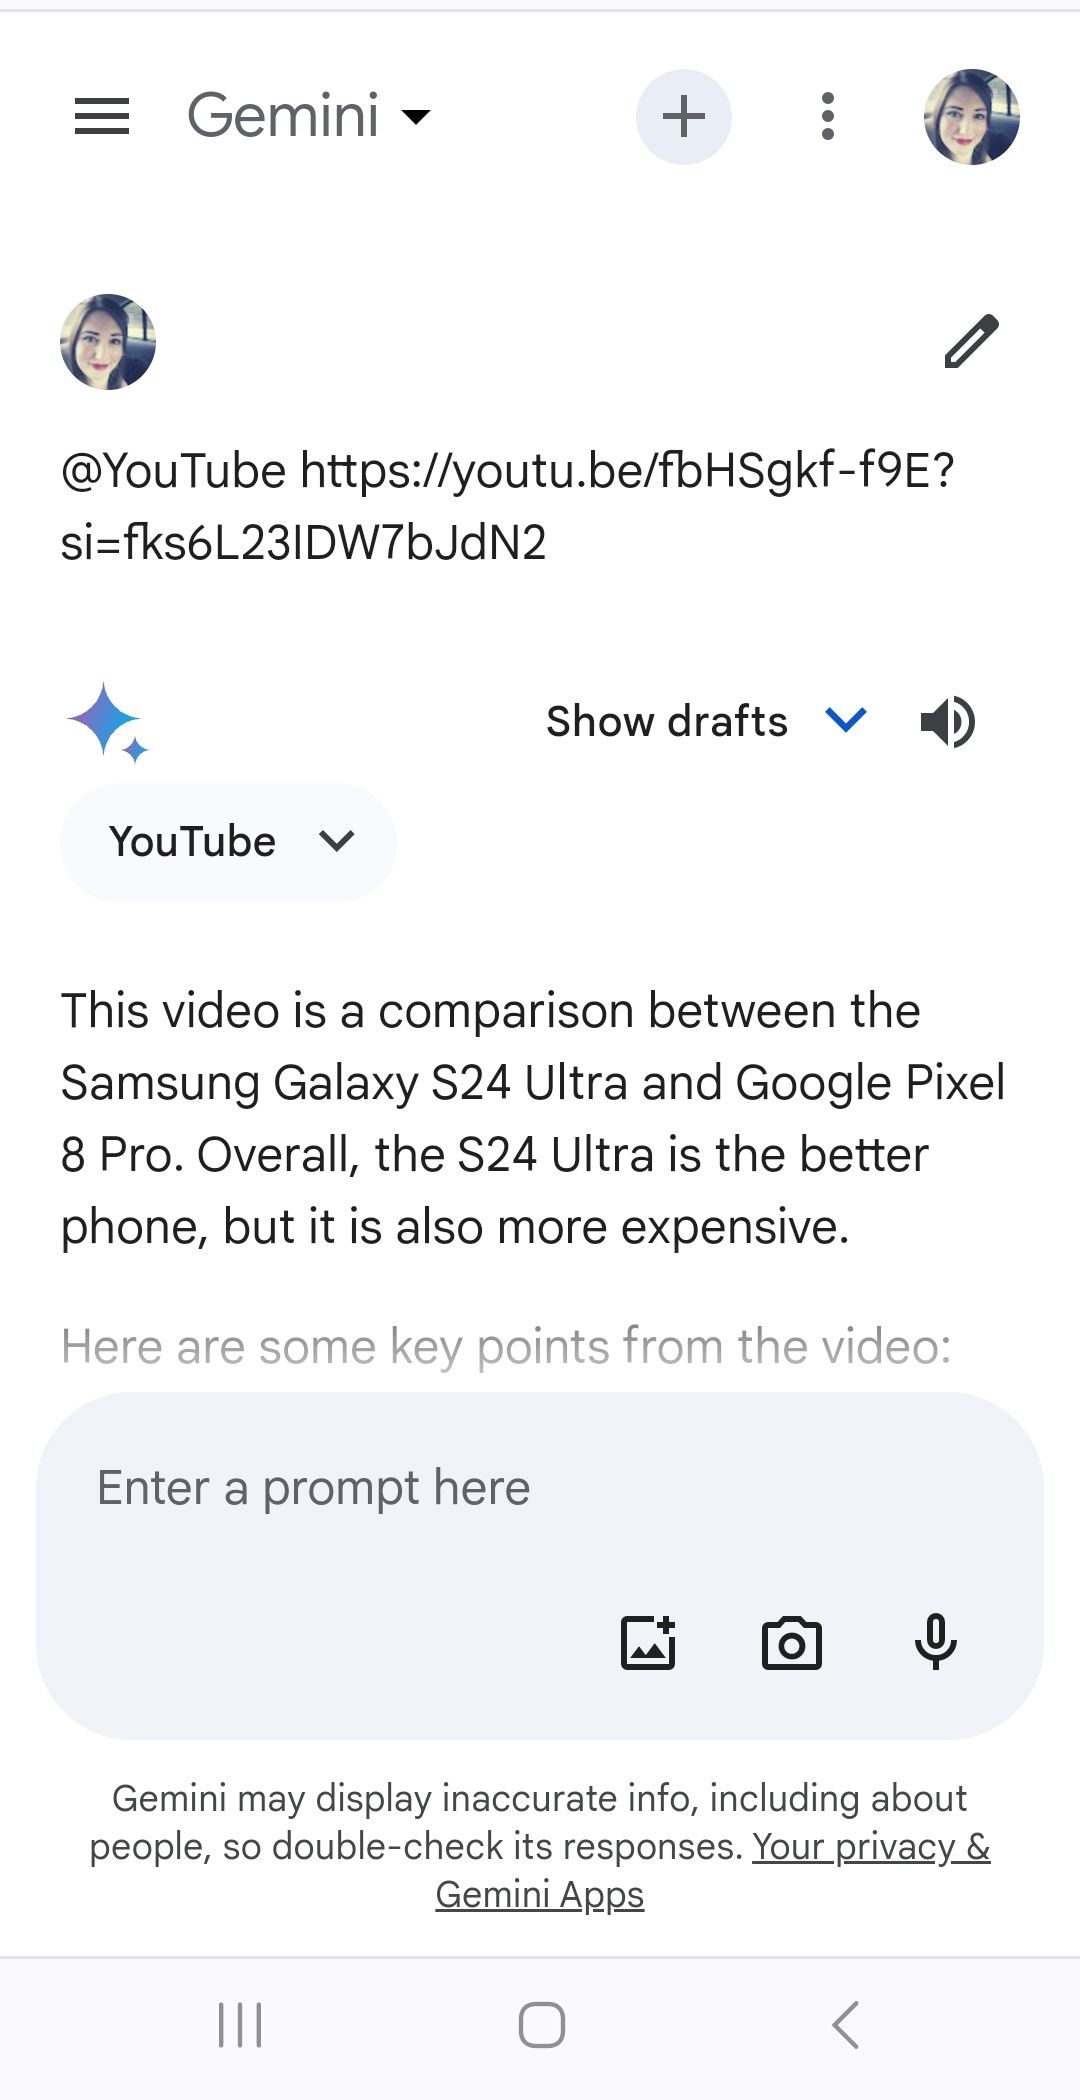 google gemini response to youtube video link prompt request